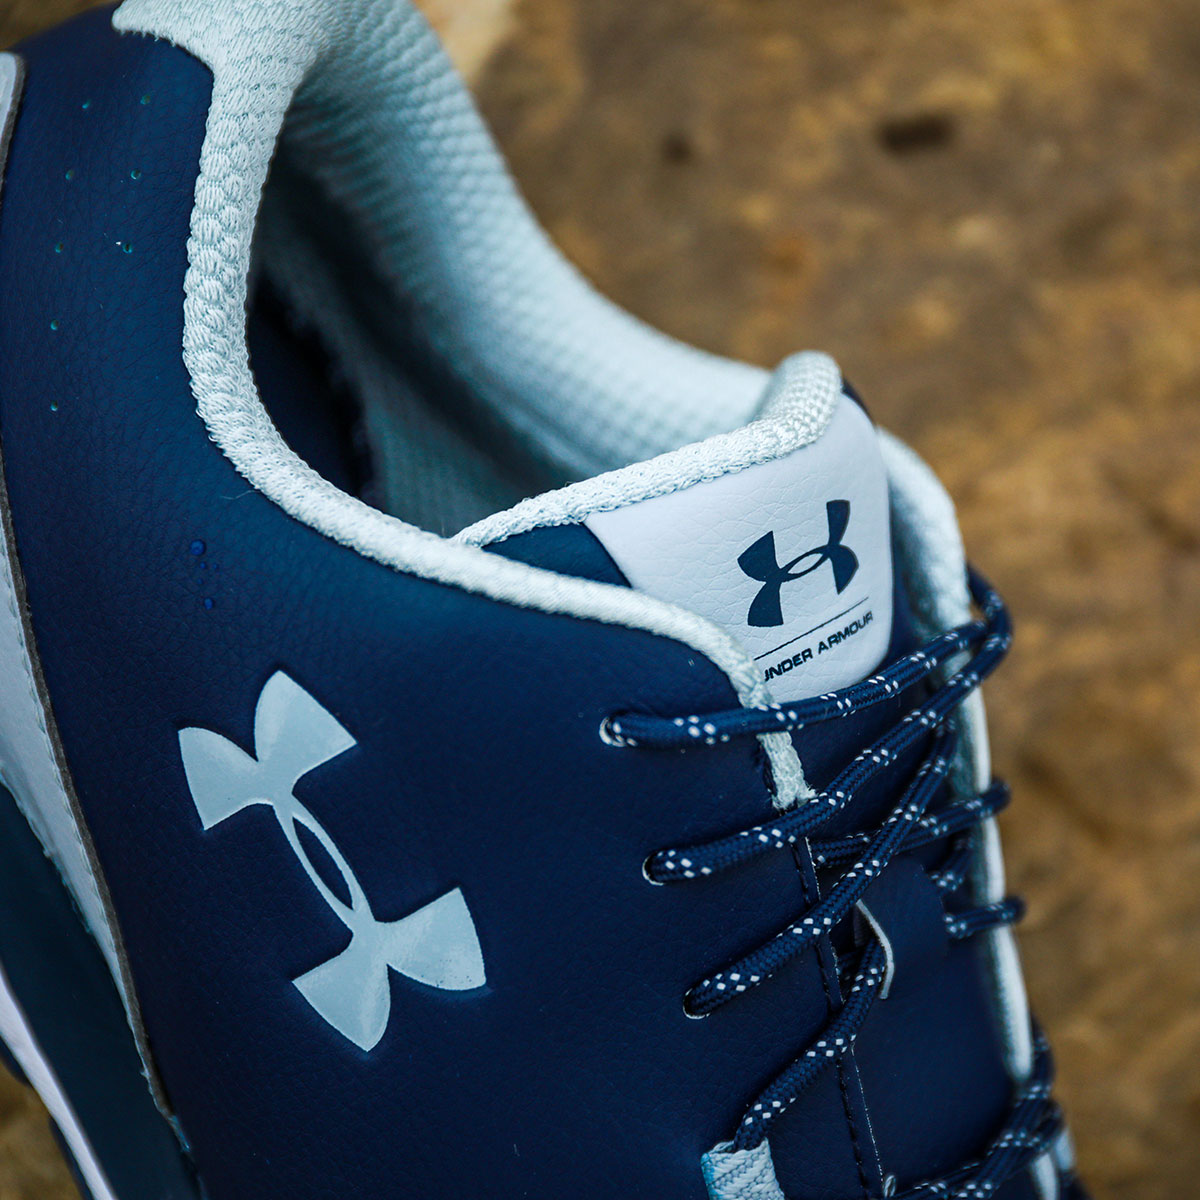 Under Armour Medal RST Shoes from 